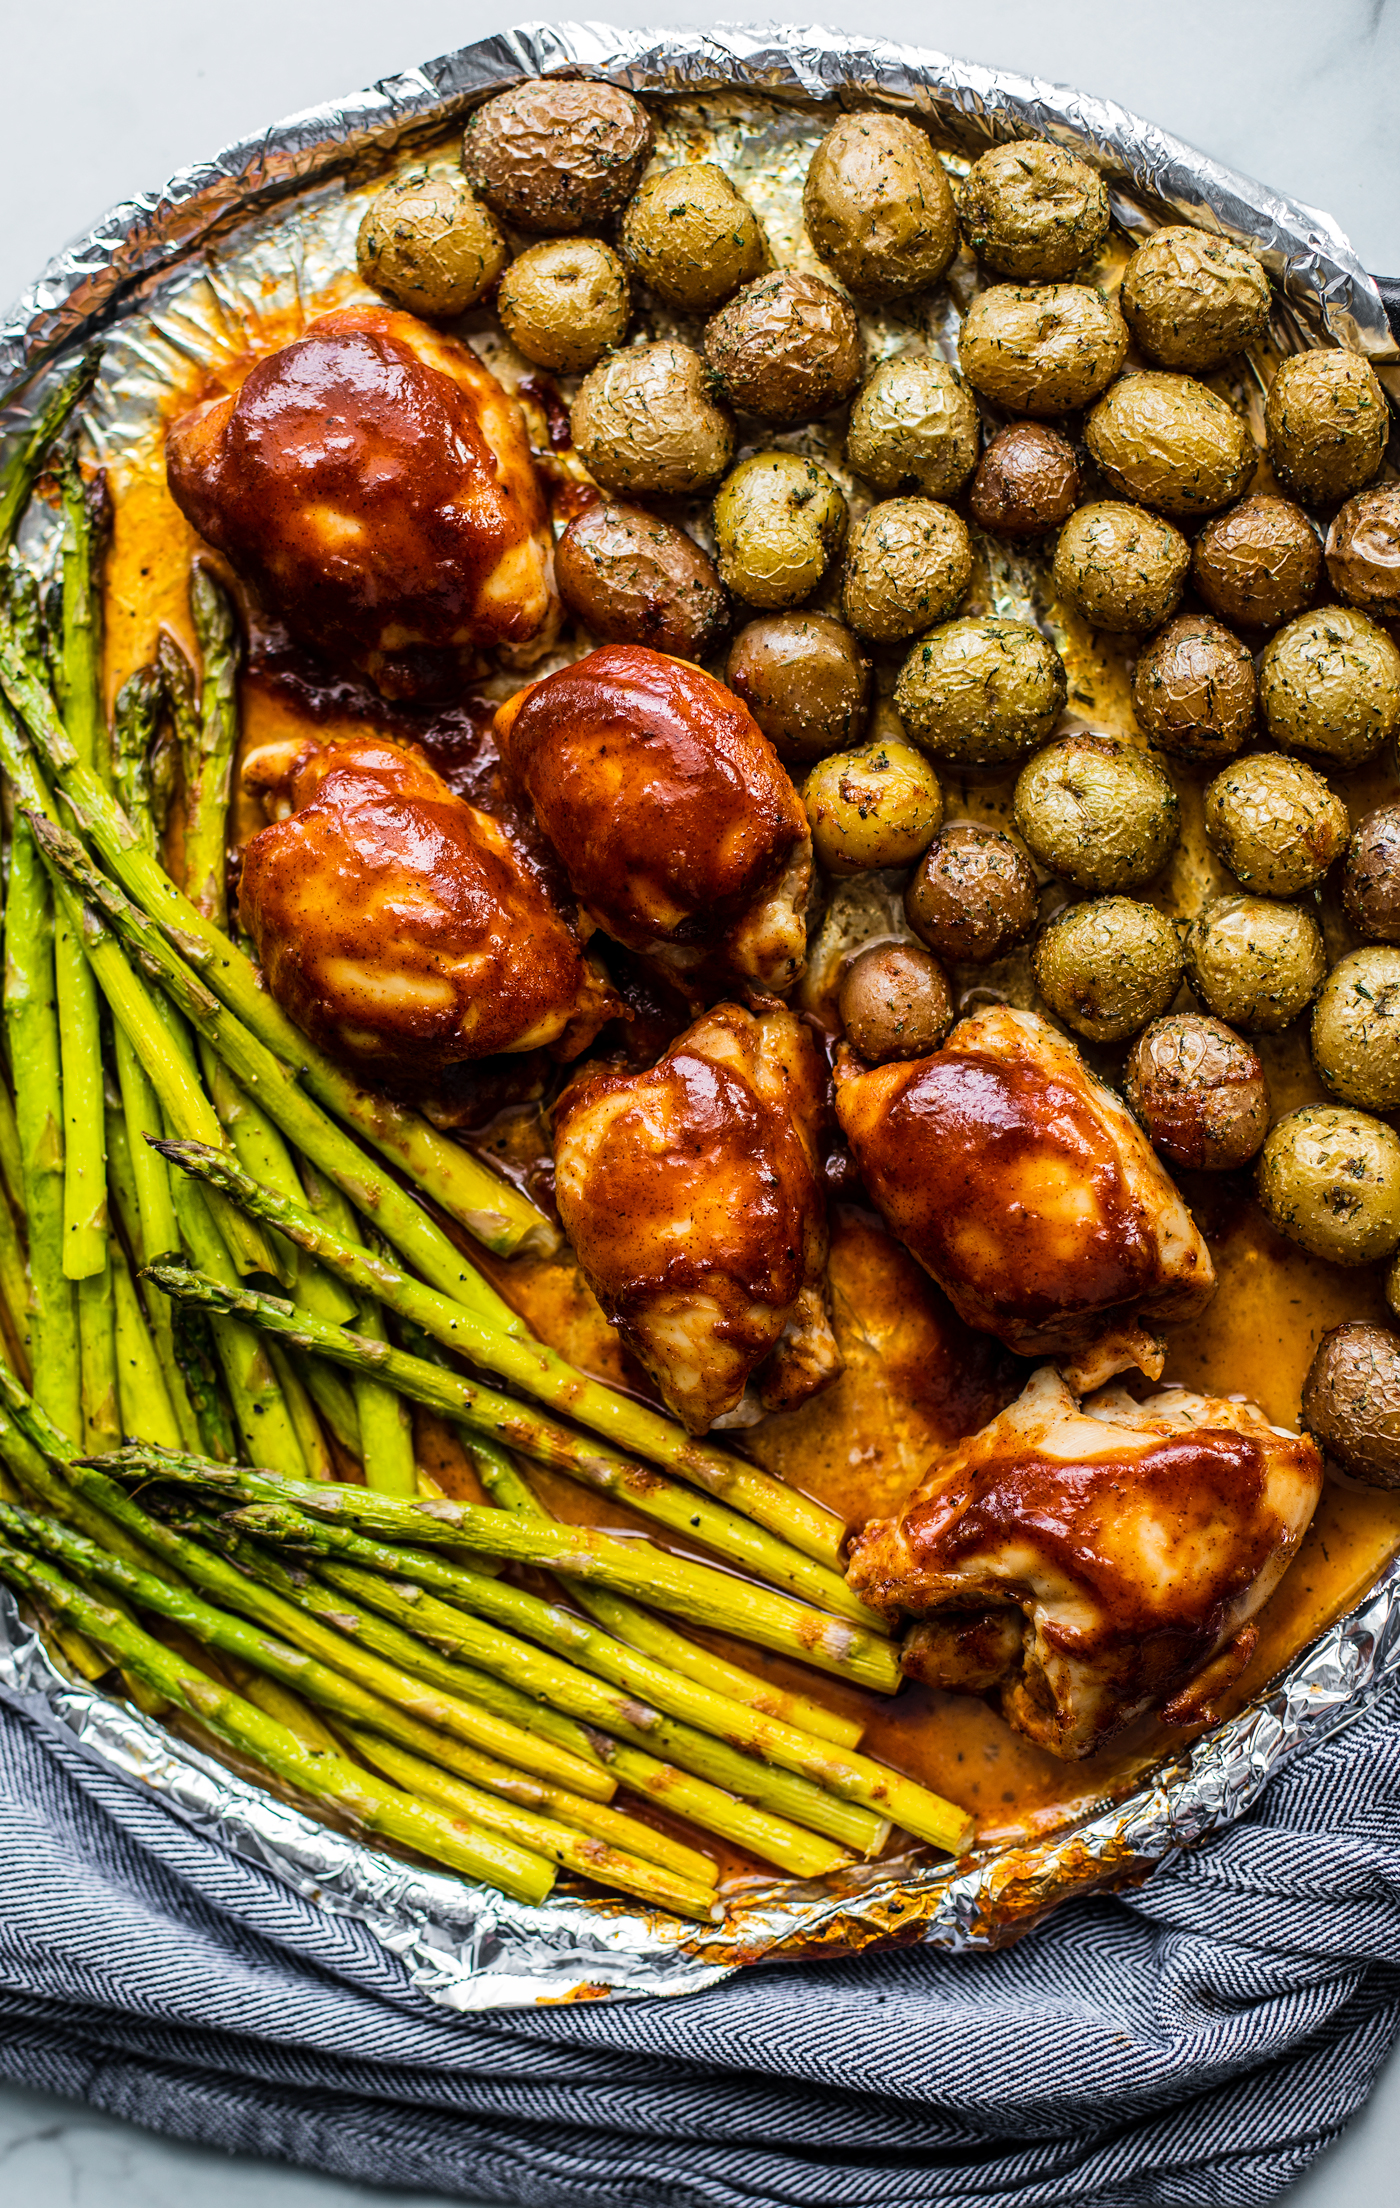 Roasted asparagus, baby potatoes, and BBQ chicken on a sheet pan.